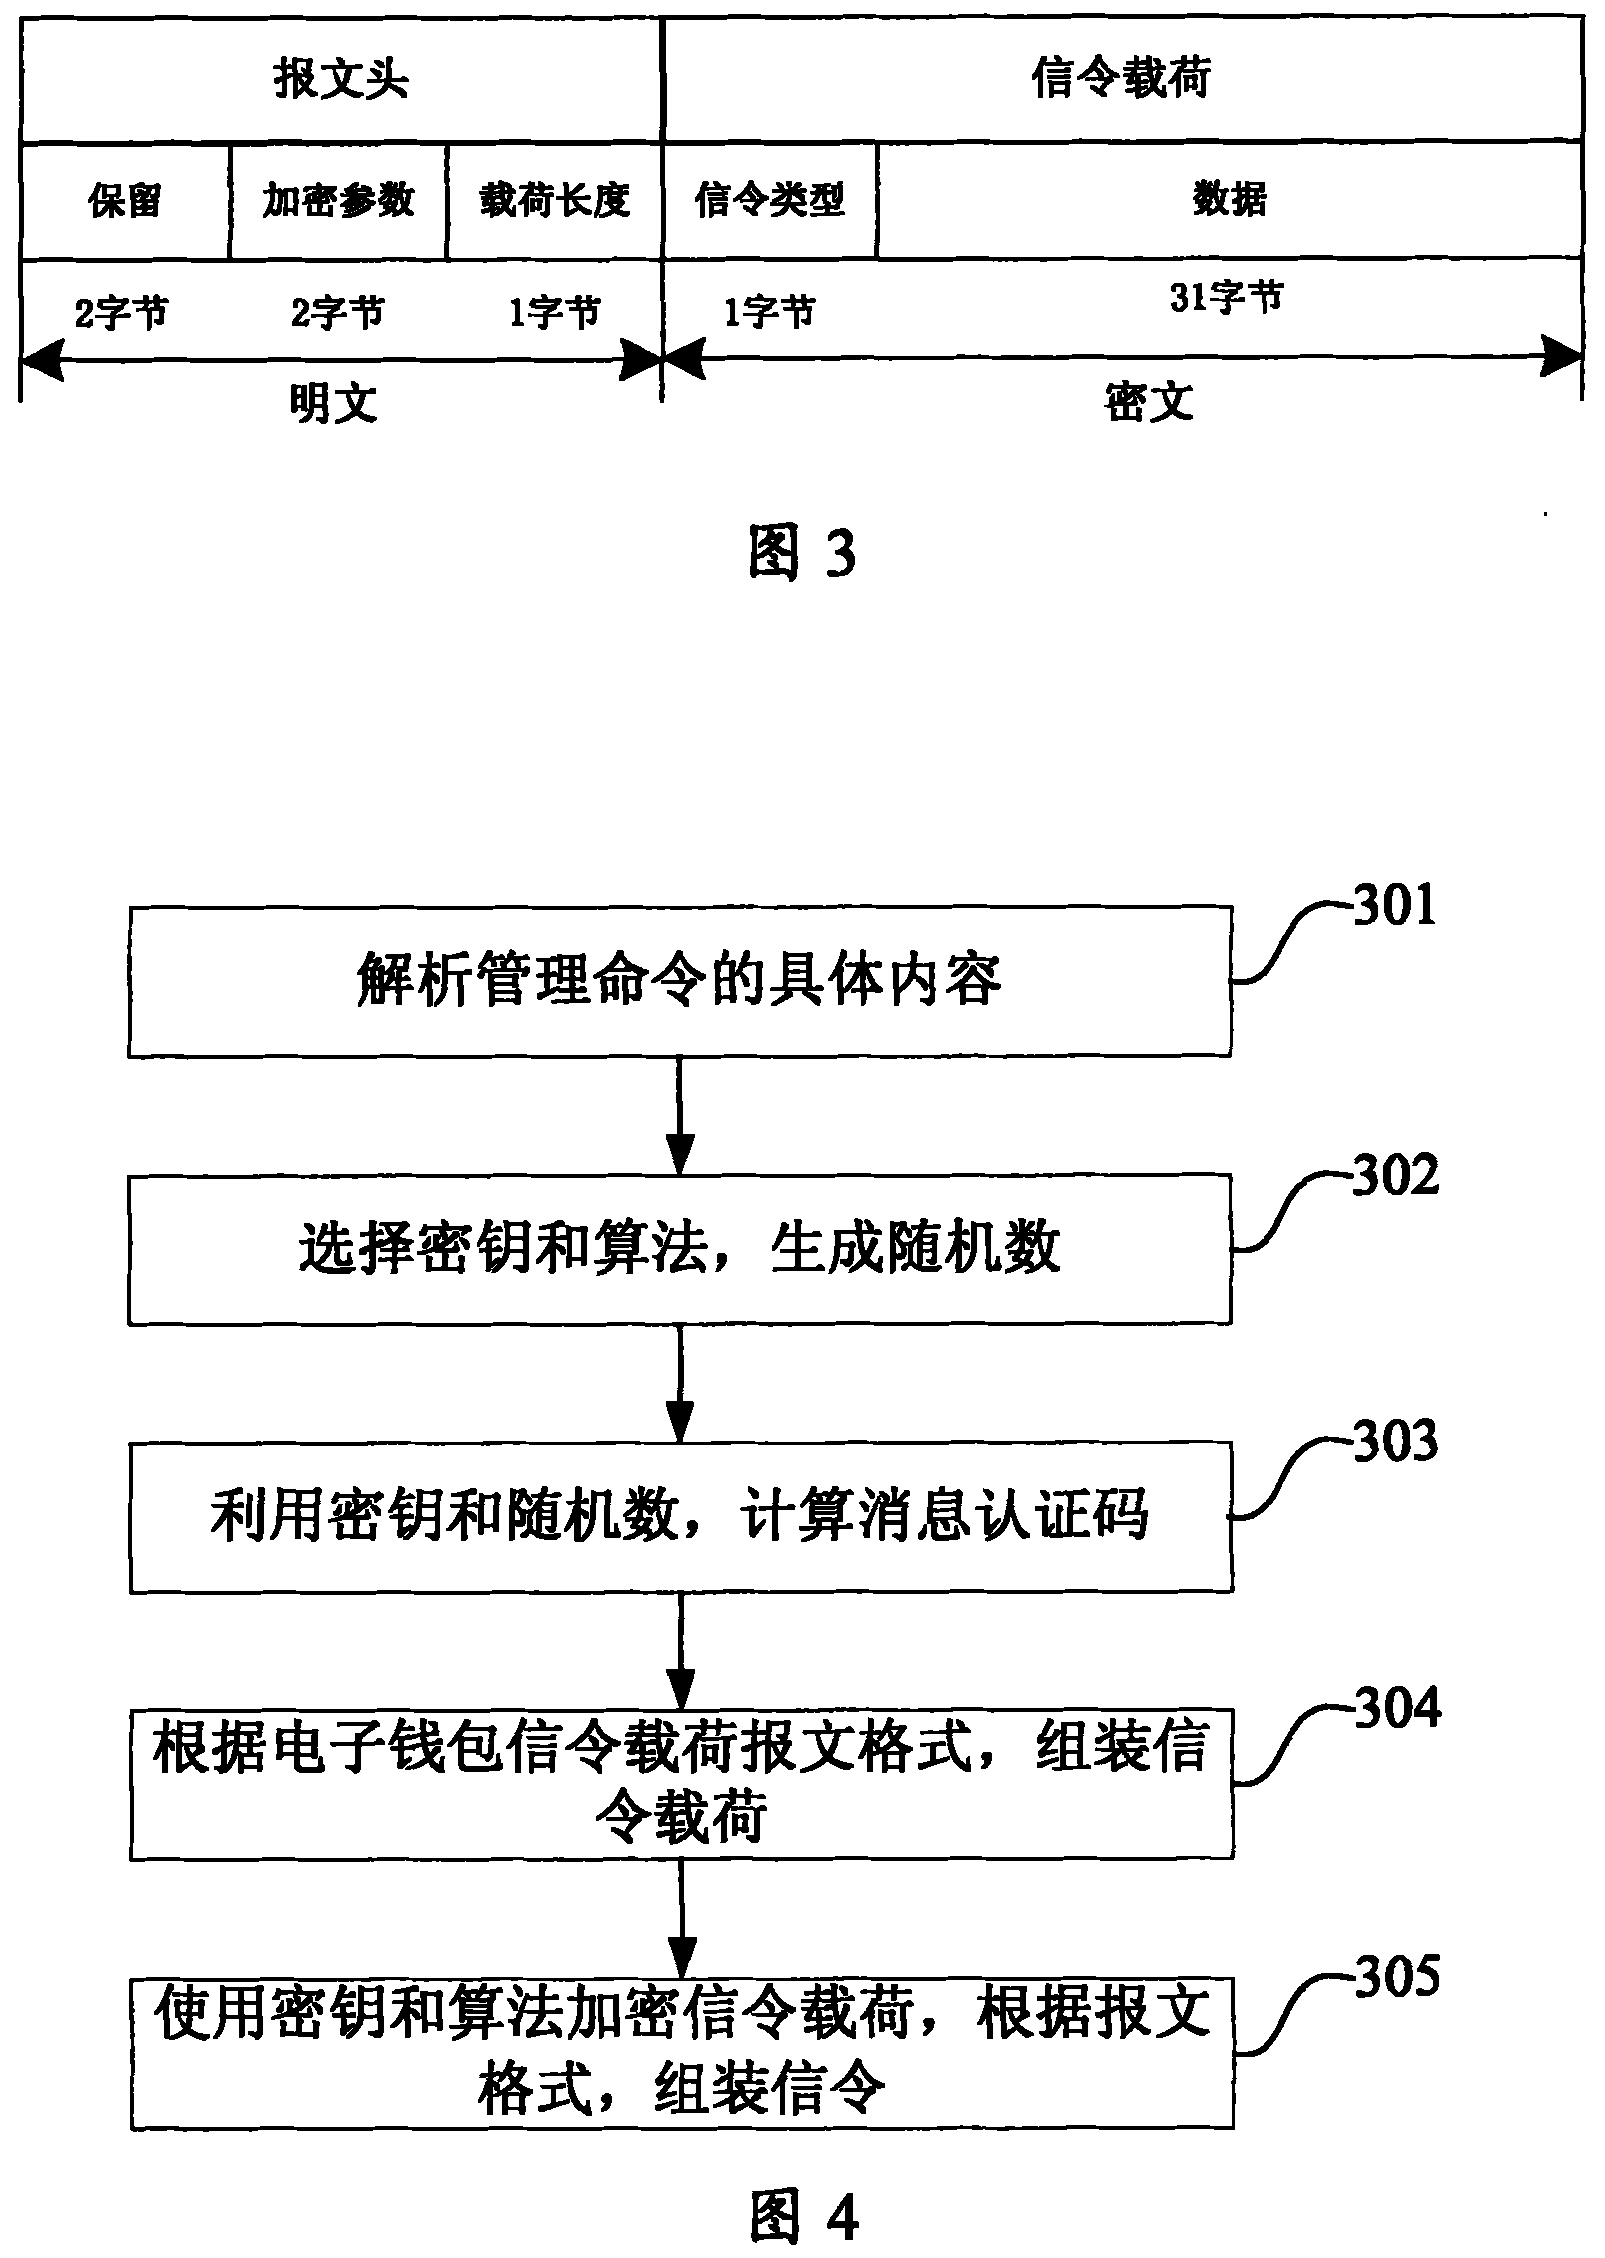 System for long-range managing electronic purse state